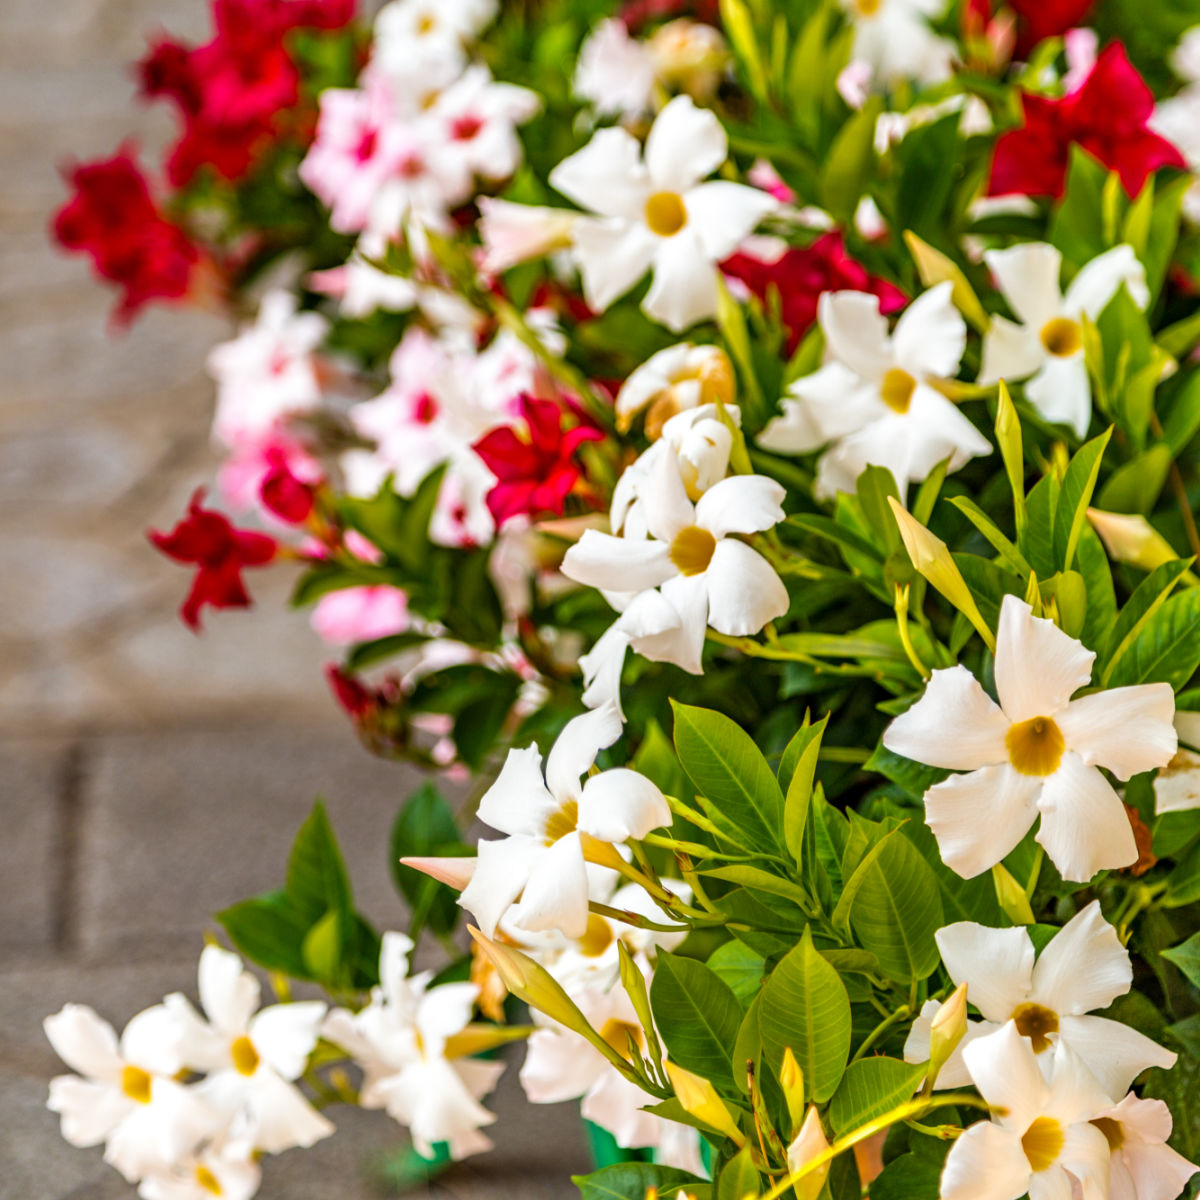 Growing Dipladenia: Unlocking the Beauty of Mandevilla’s Distant Cousin